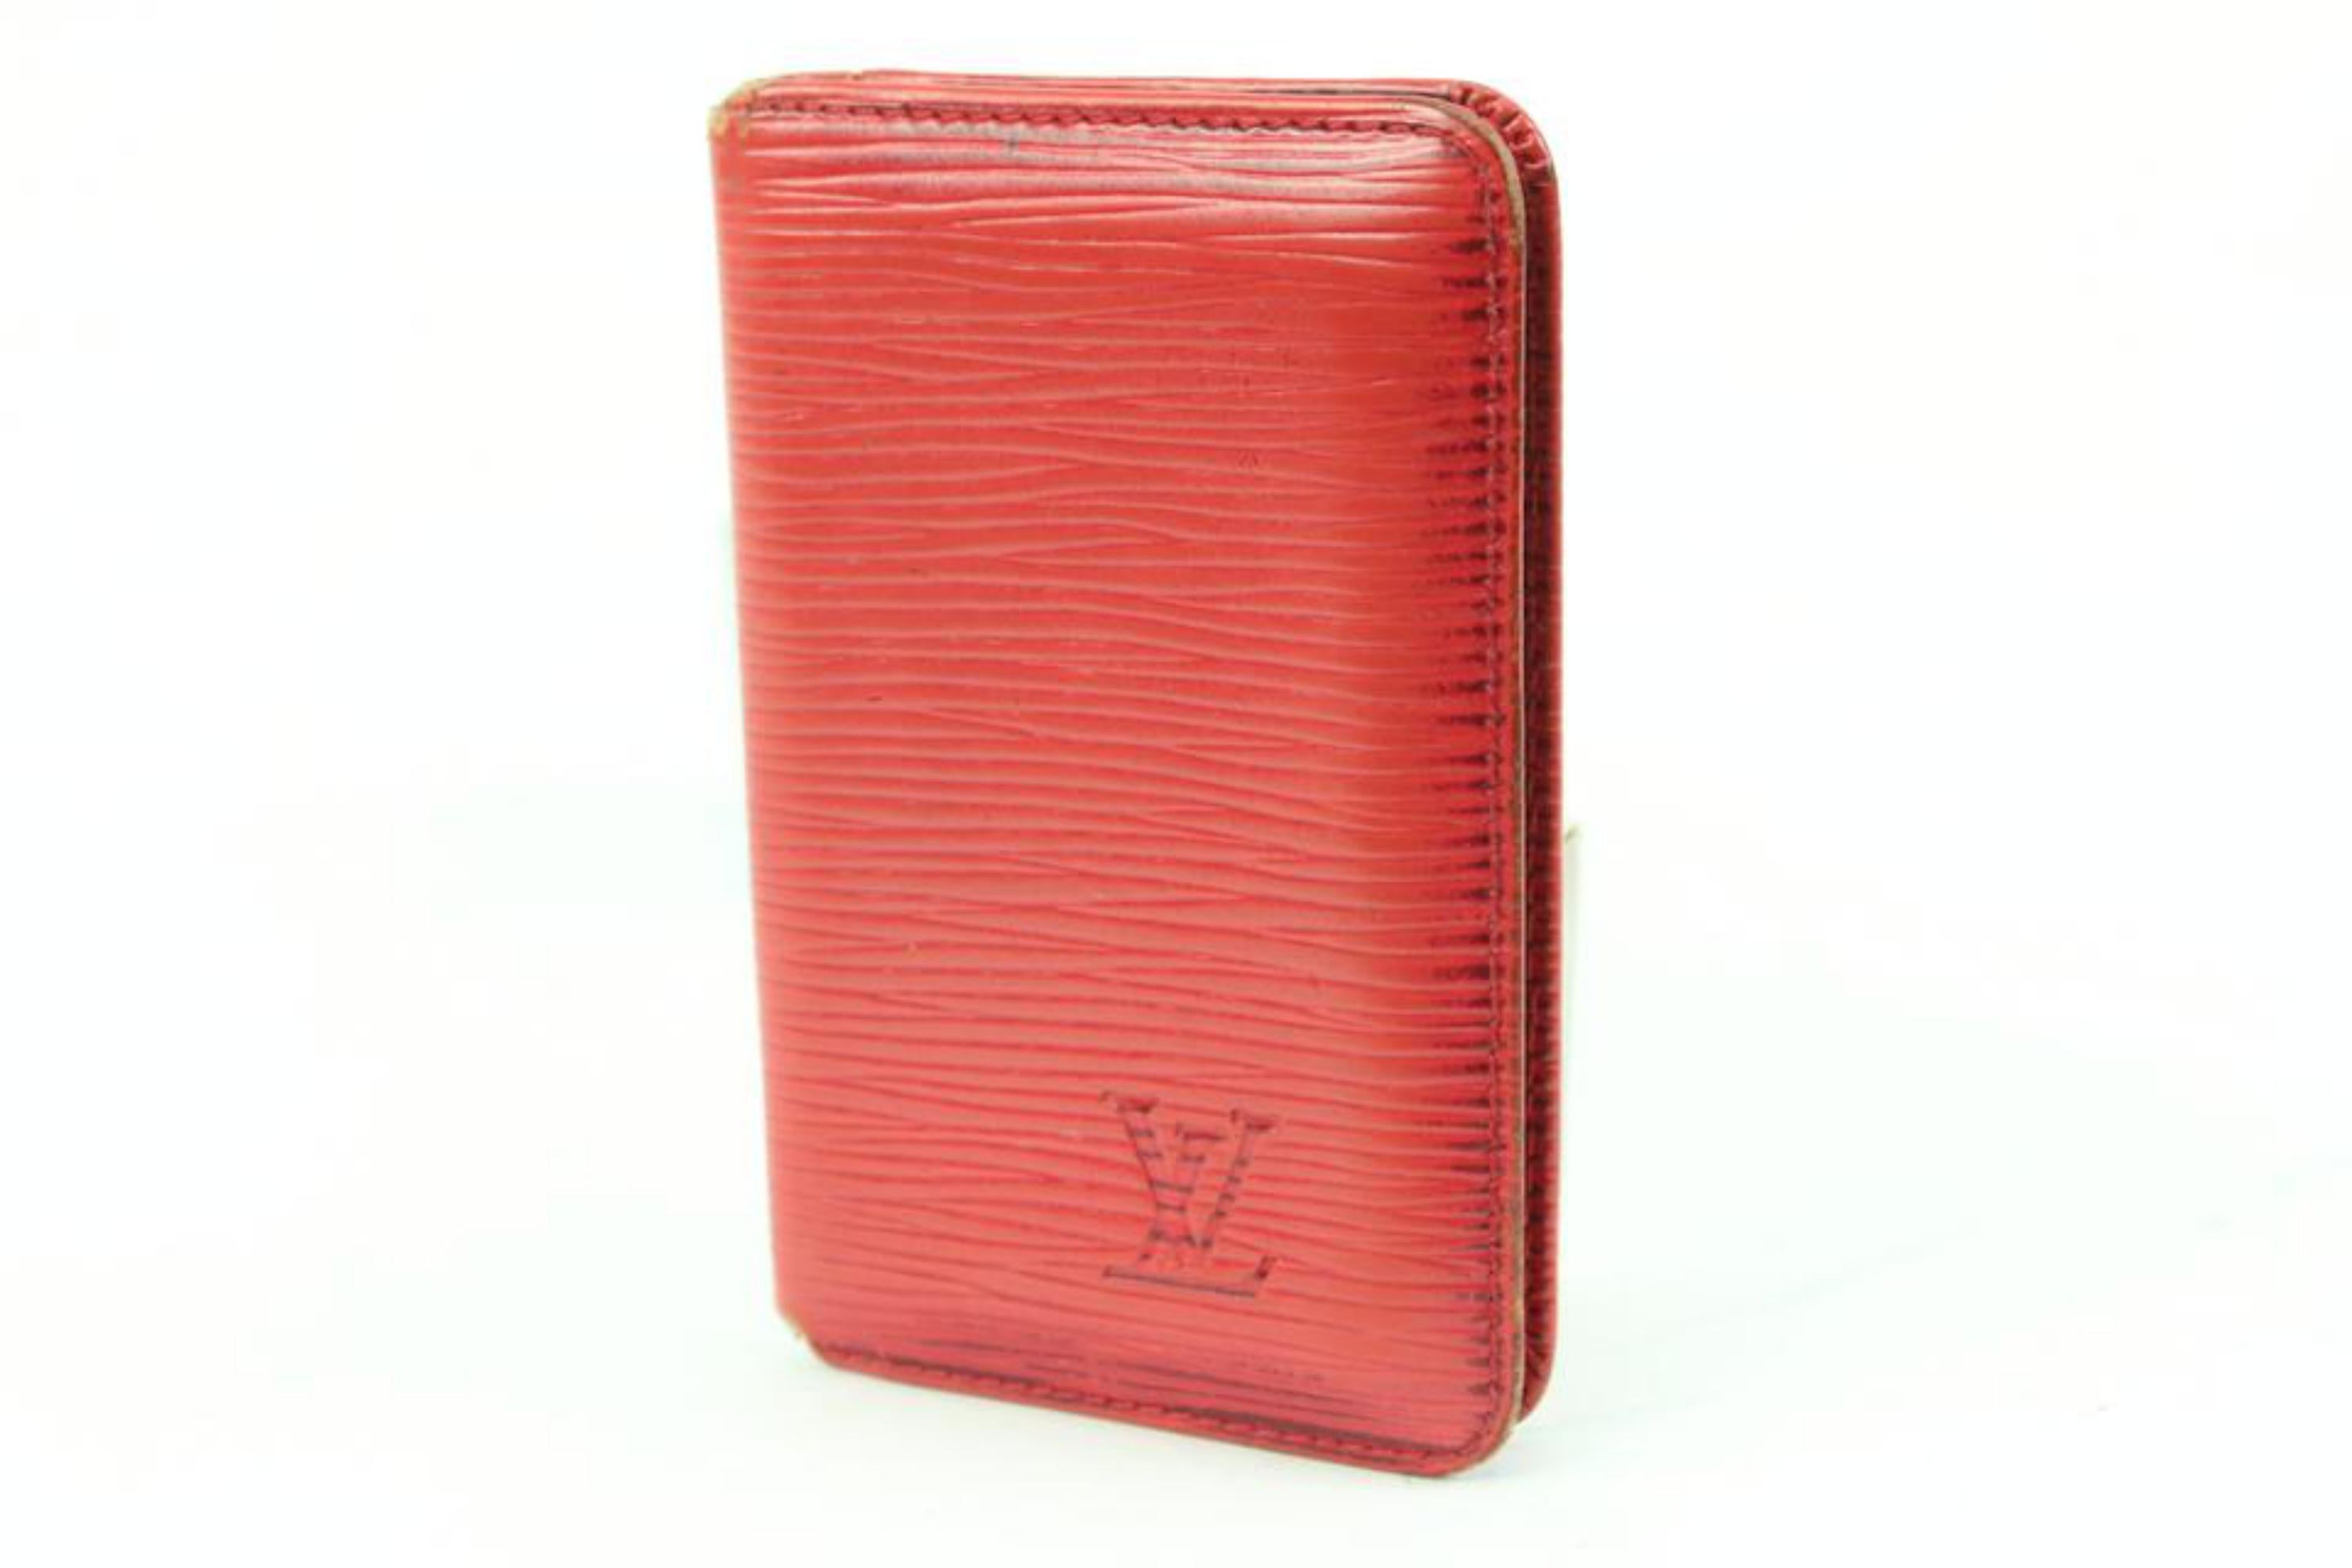 Louis Vuitton Red Epi Leather Porte Cartes Card Holder Wallet Insert s330lv30
Made In: Spain
Measurements: Length:  2.75